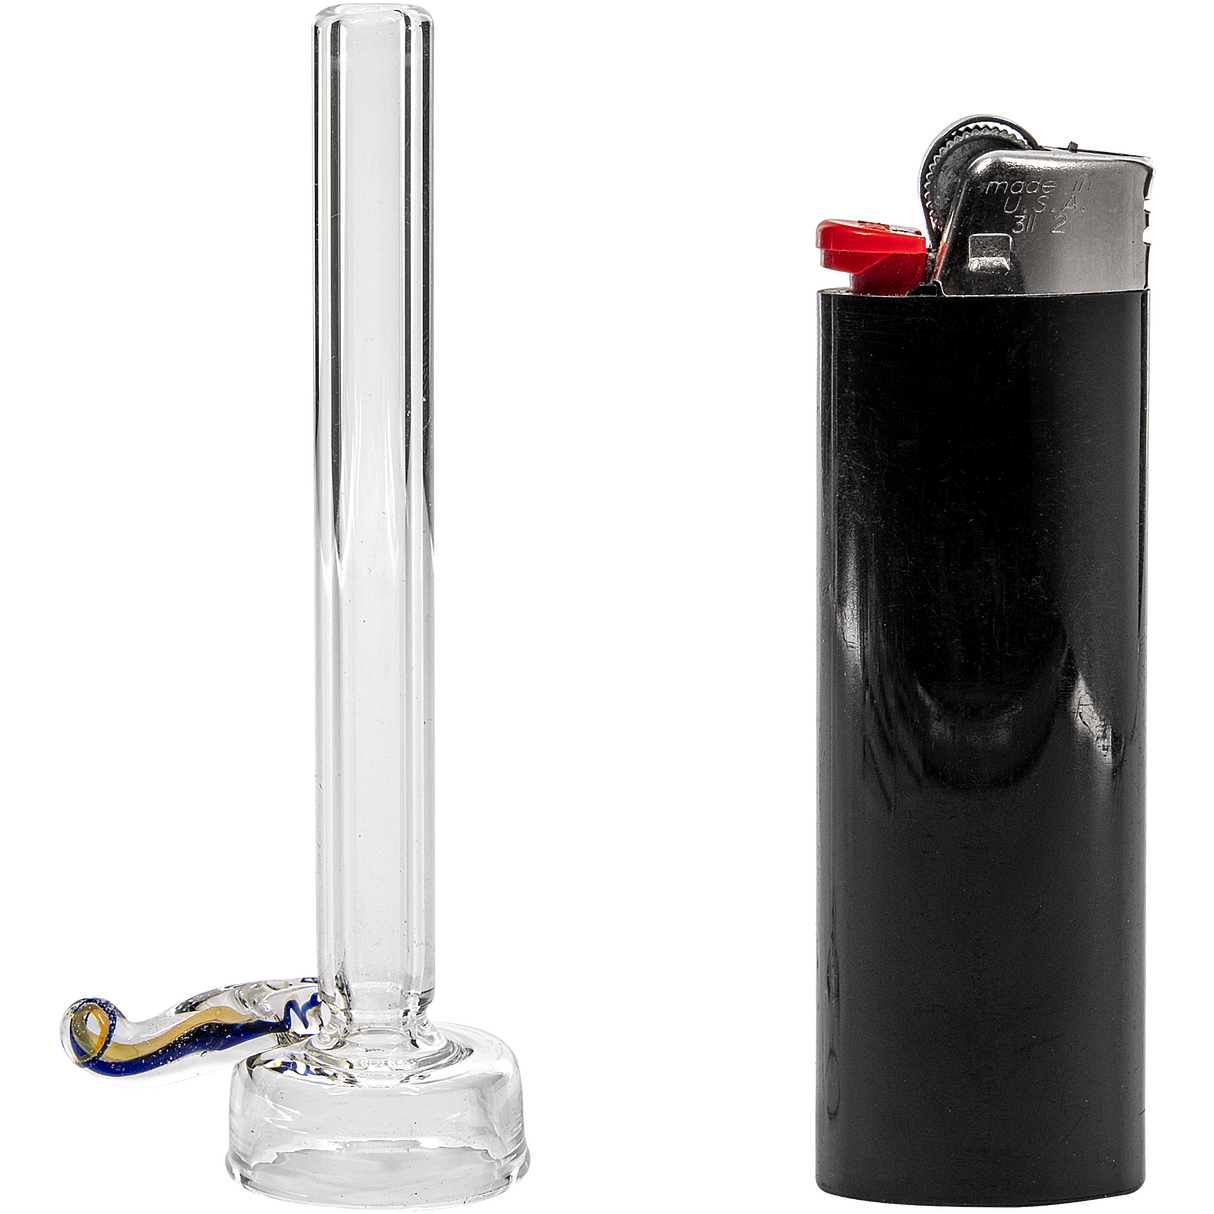 LA Pipes 9mm Clear Funnel Slide Bowl with Blue Handle next to Lighter, Side View